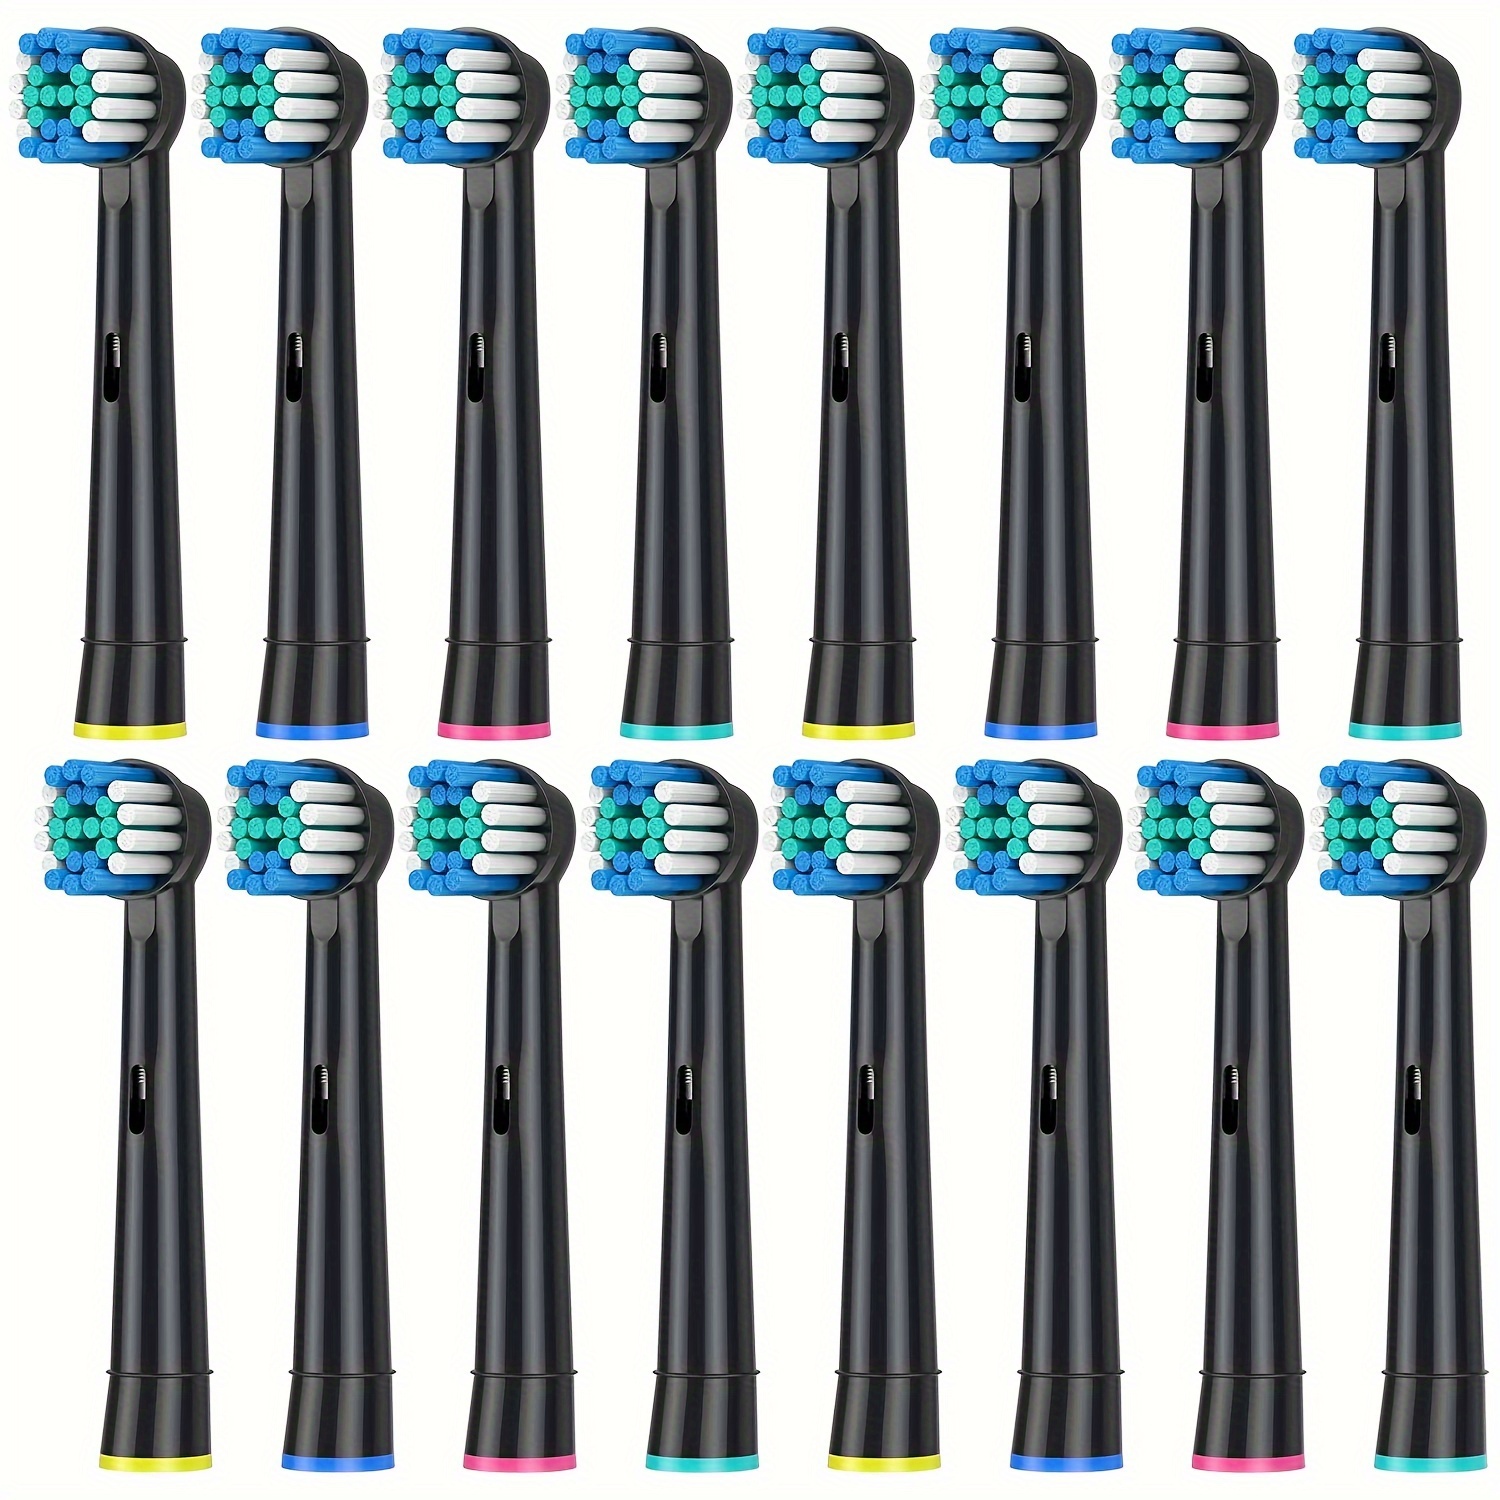 

Replacement Toothbrush Heads, Compatible With Oral-b Electric Toothbrushes, Precision Clean Fit For Professional, Vitality, Pro, Smart, And Genius Series, Enhanced Bristle Design For Deep Cleaning